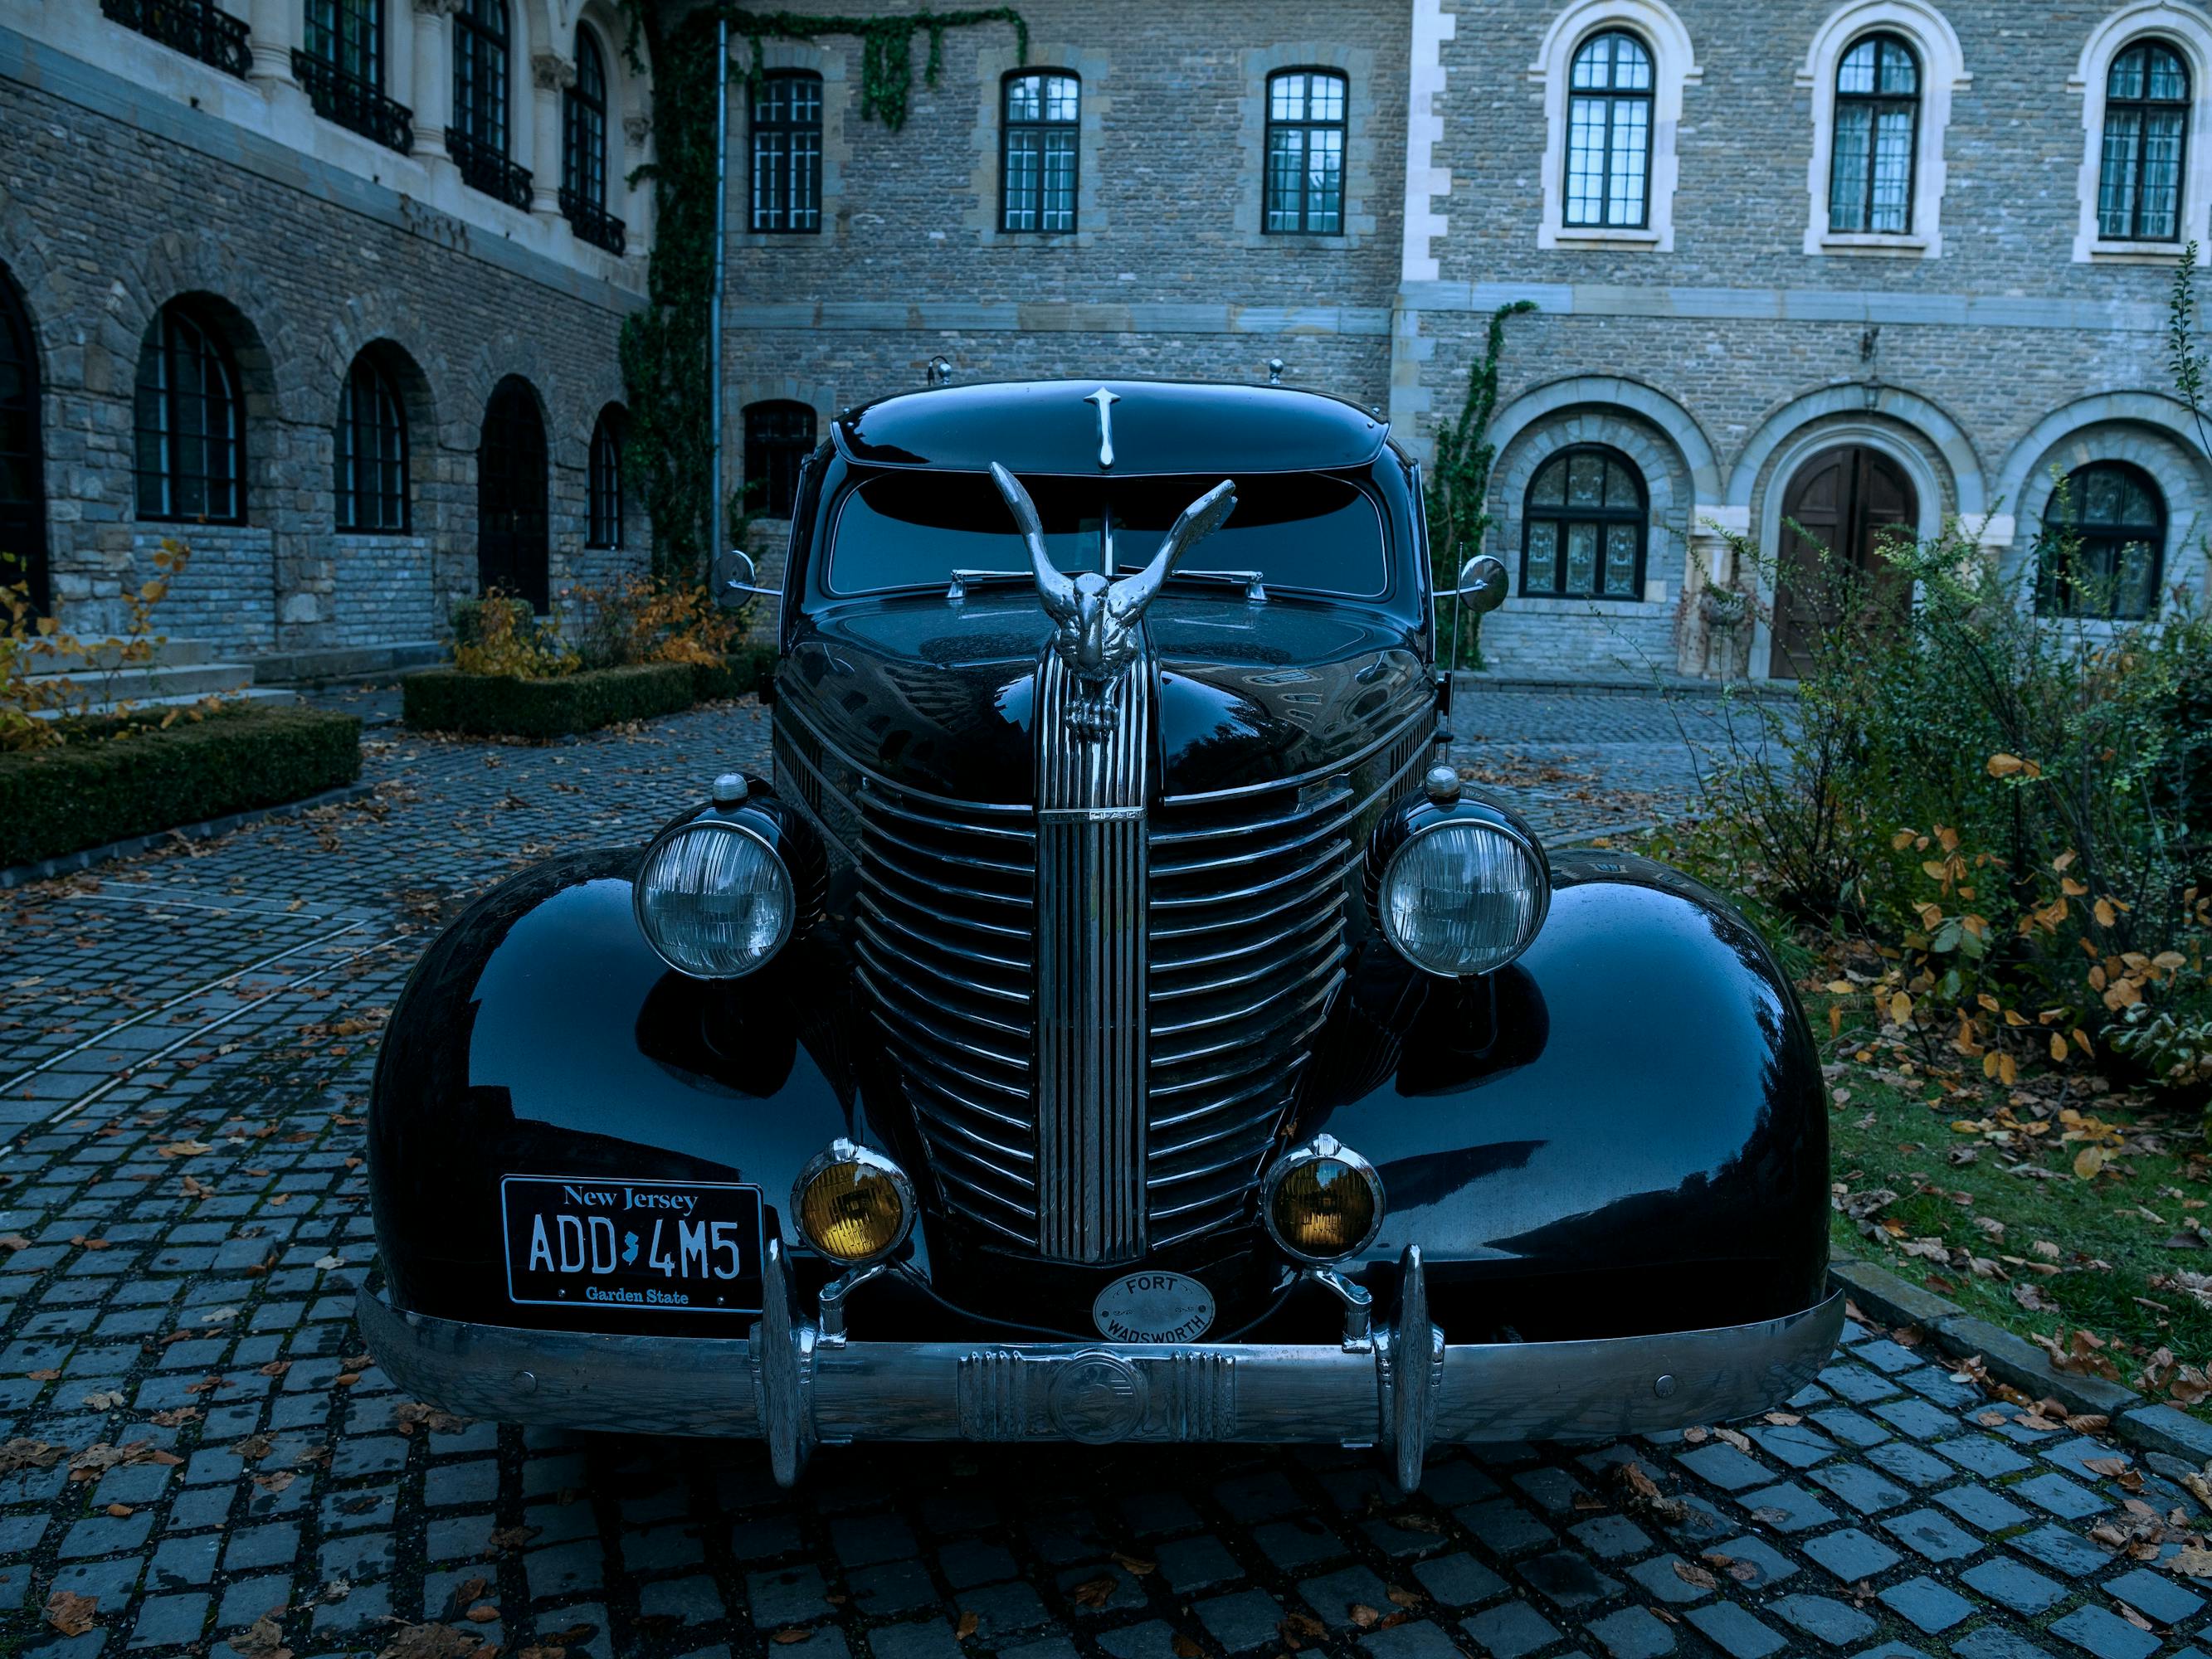 The Addams family limo sits in Nevermore's driveway. The exterior is glossy black.